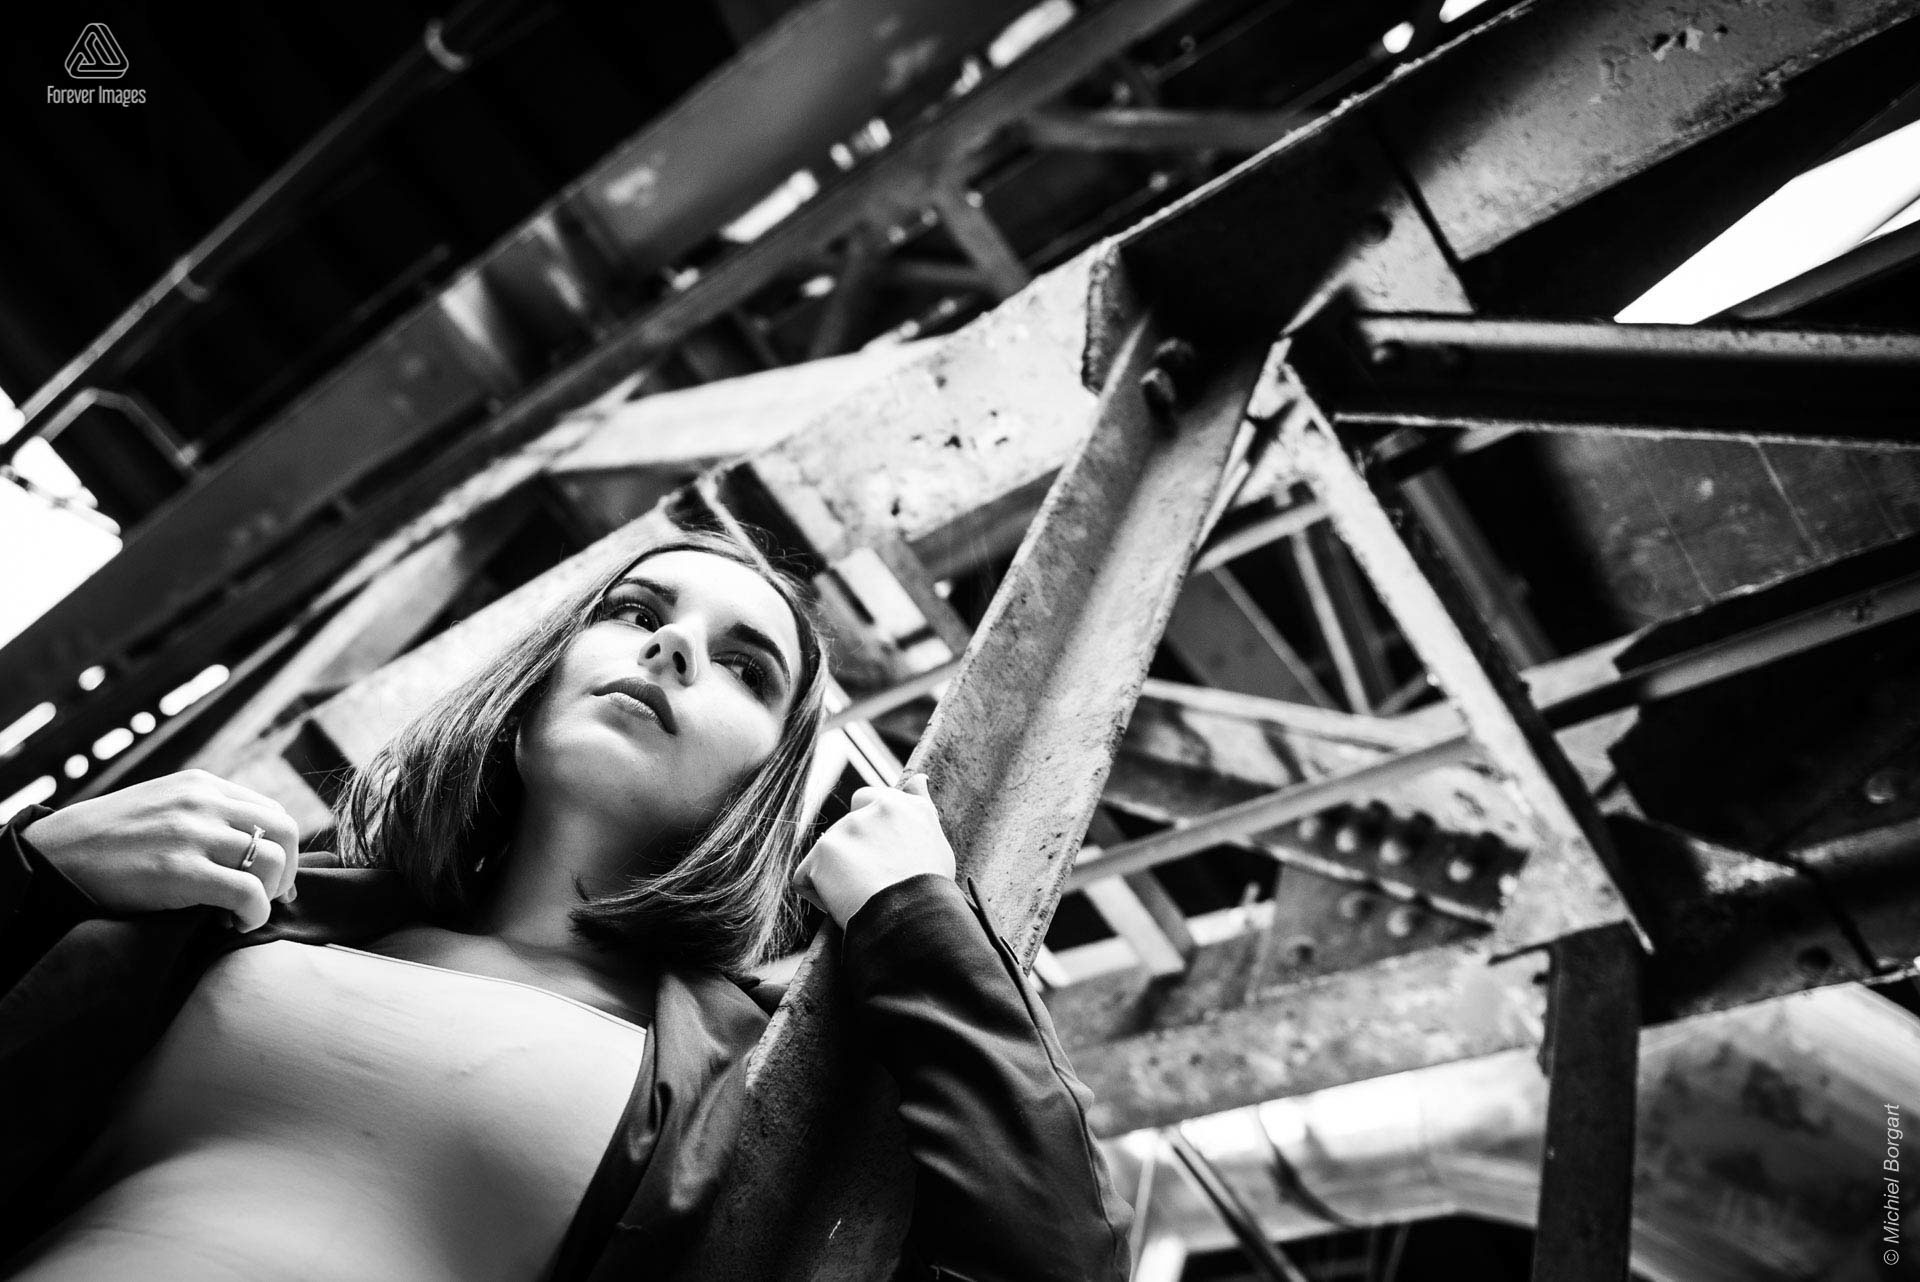 Portrait photo black and white B&W lady in steel construction | Isis Vaandrager NDSM Werf Amsterdam | Portrait Photographer Michiel Borgart - Forever Images.